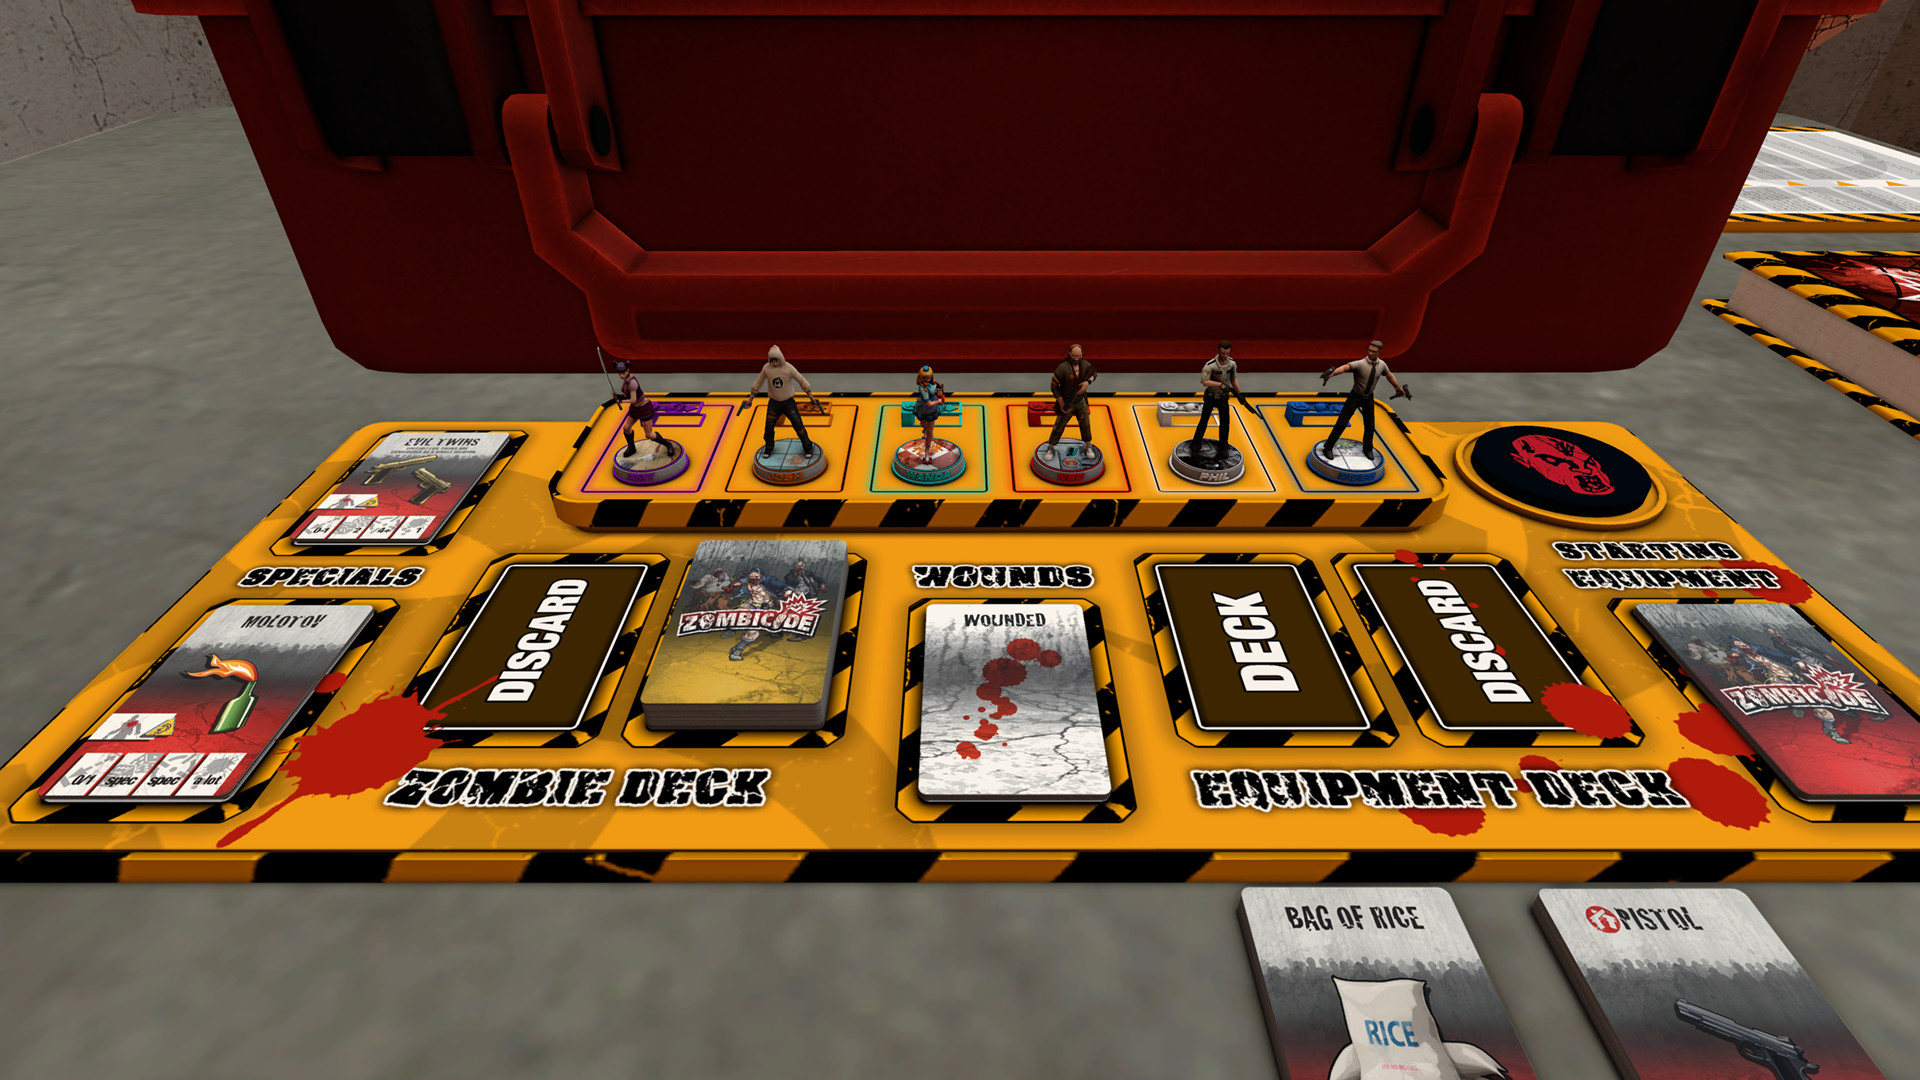 Tabletop Simulator - Zombicide on Steam